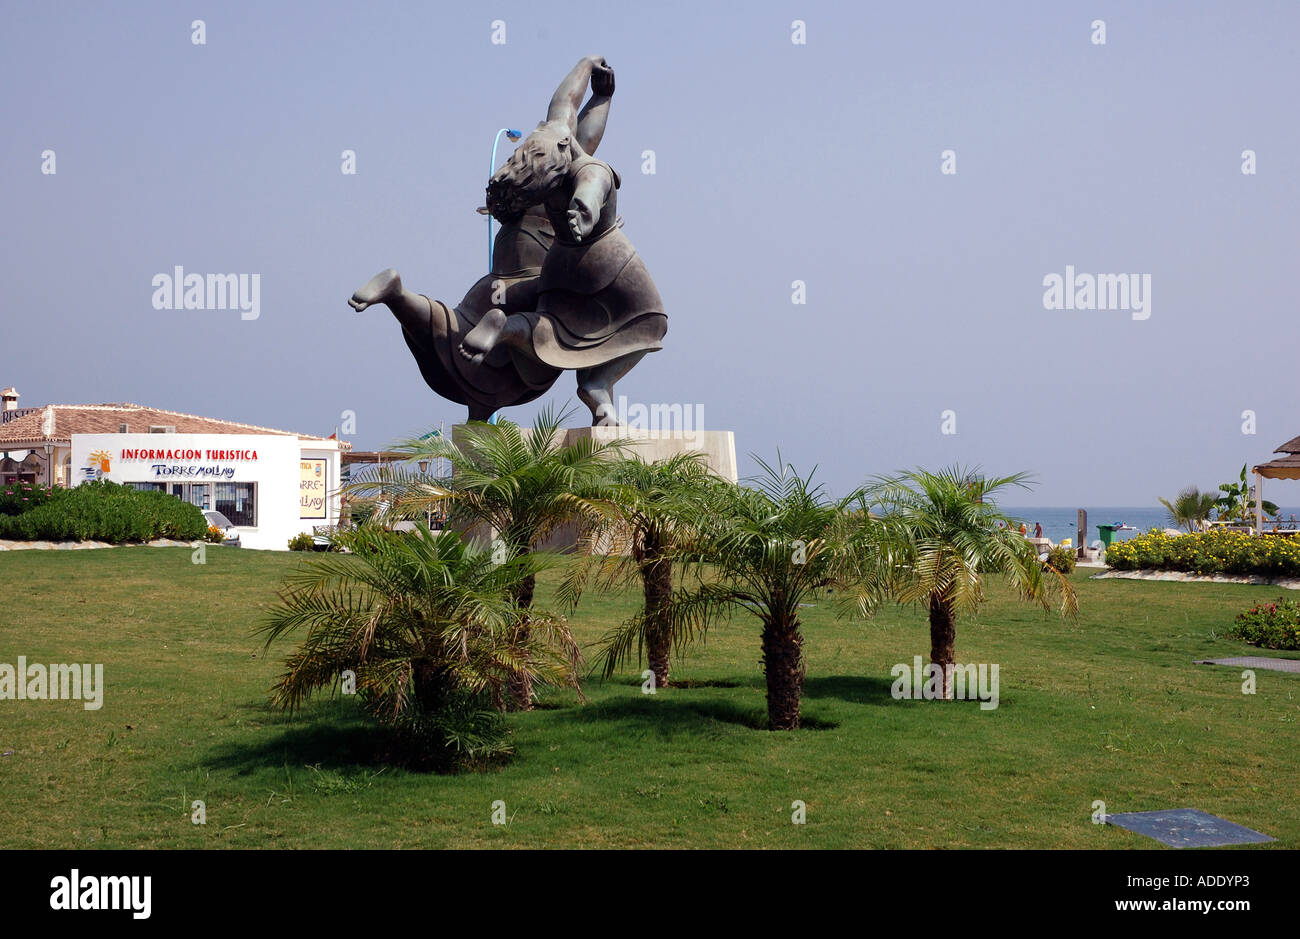 View of modern sculpture by the seafront Torremolinos Costa del Sol Sun Coast Andalusia Andalucía España Spain Iberia Europe Stock Photo